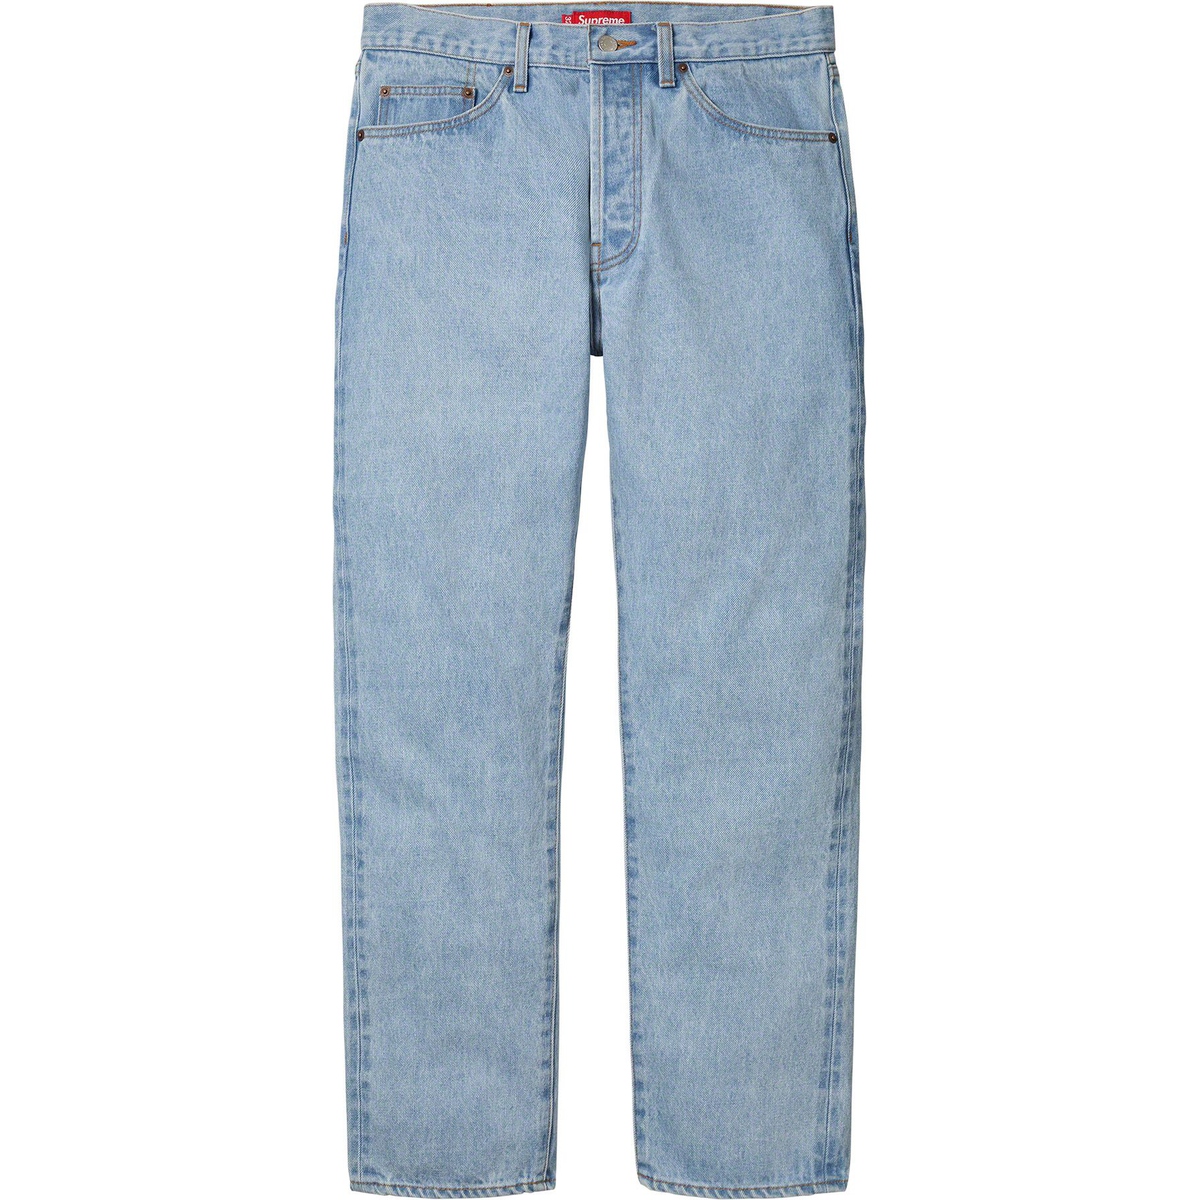 Supreme Stone Washed Slim Selvedge Jean released during fall winter 23 season